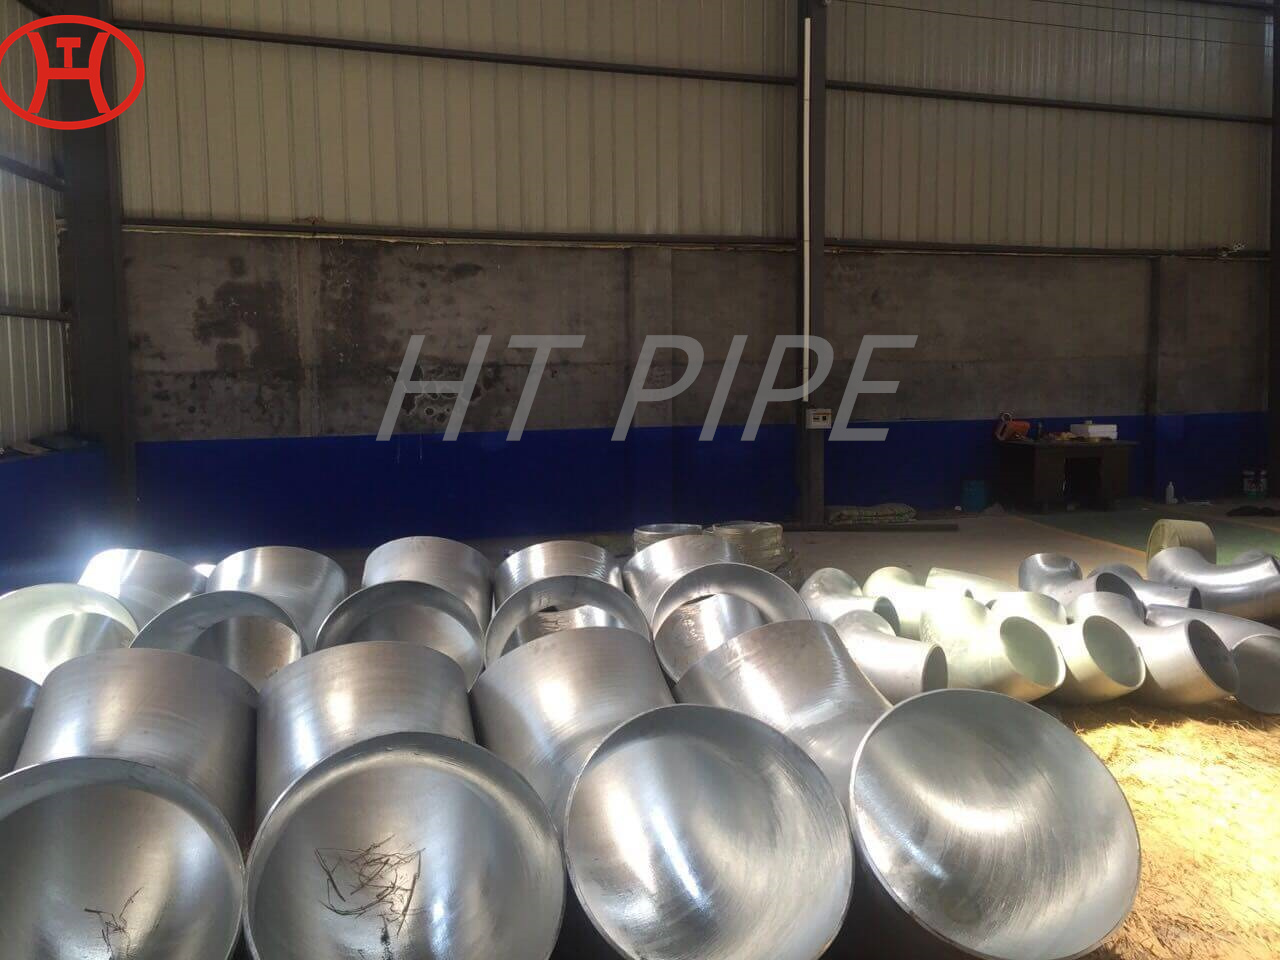 4 inch nickel alloy pipe fittings nickel alloy elbows incoloy 825